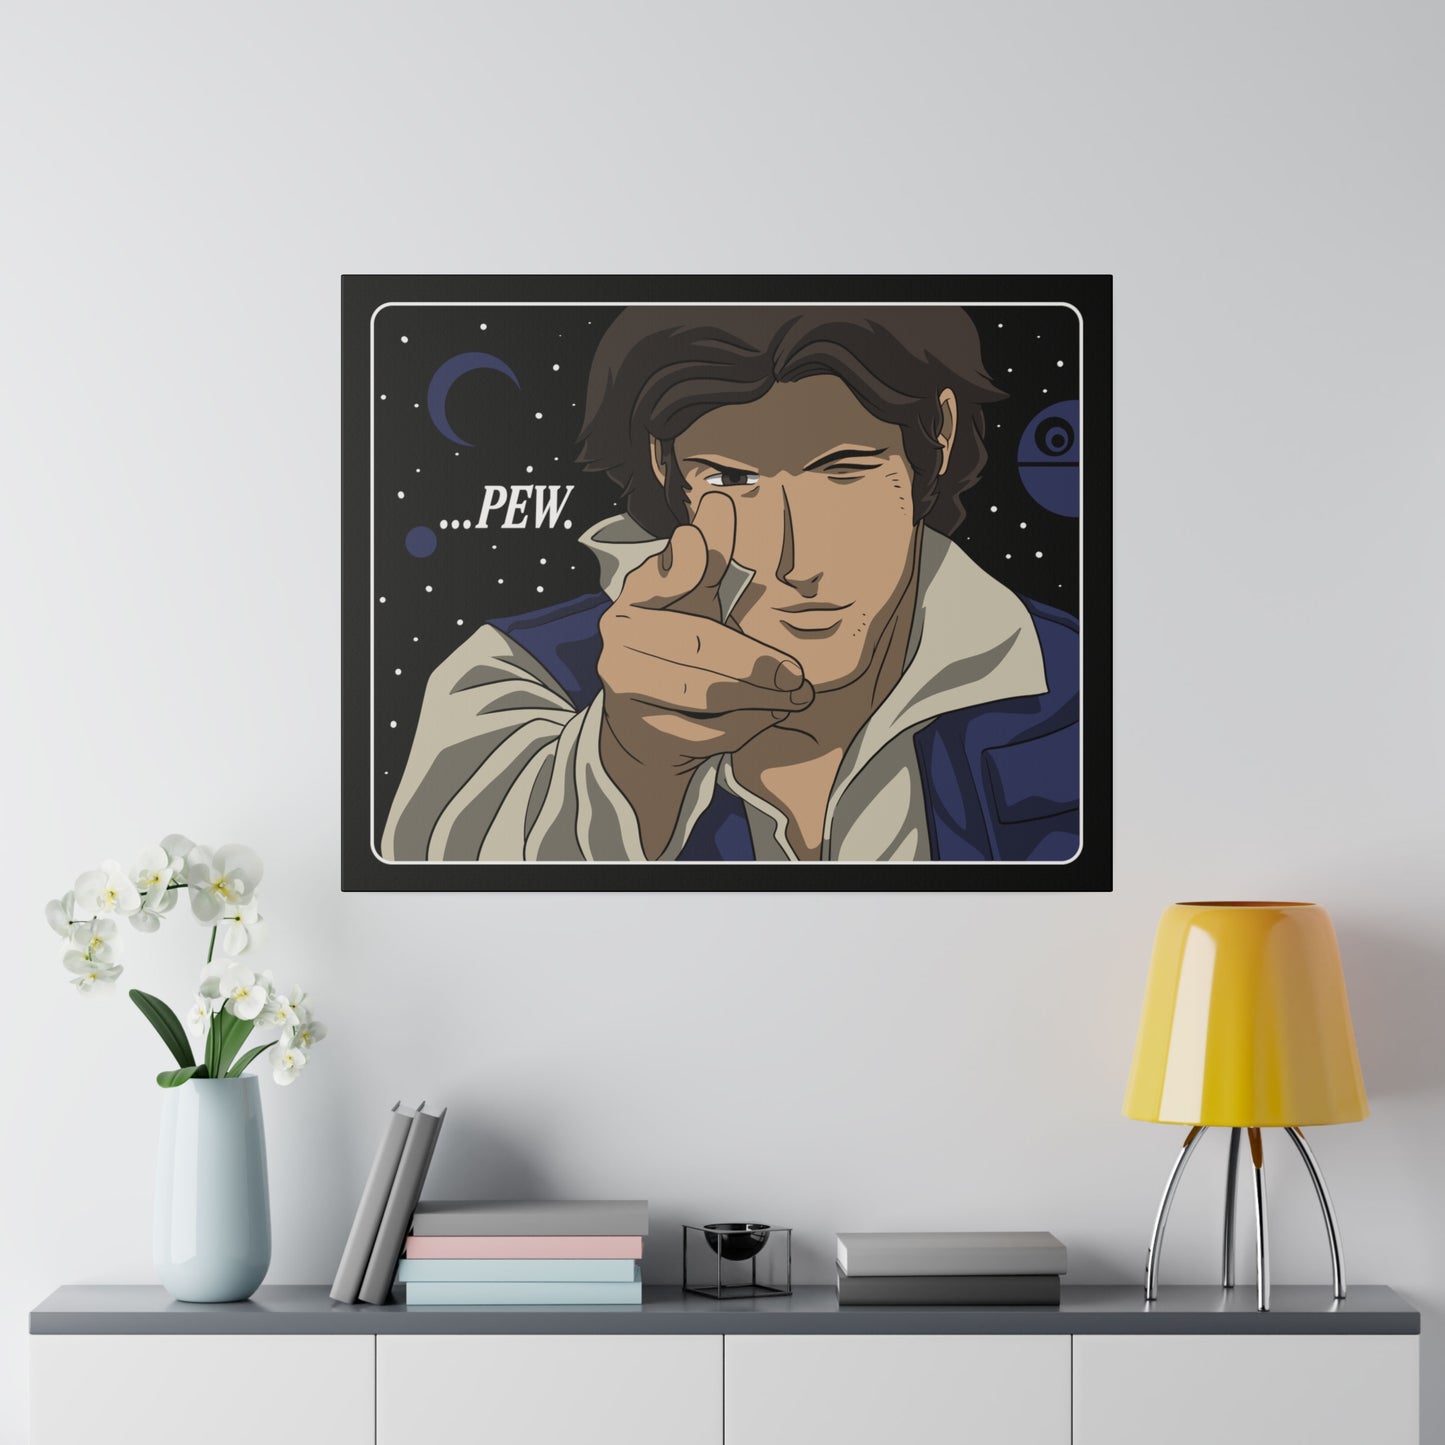 See You Space Smuggler 30" x 24" canvas print